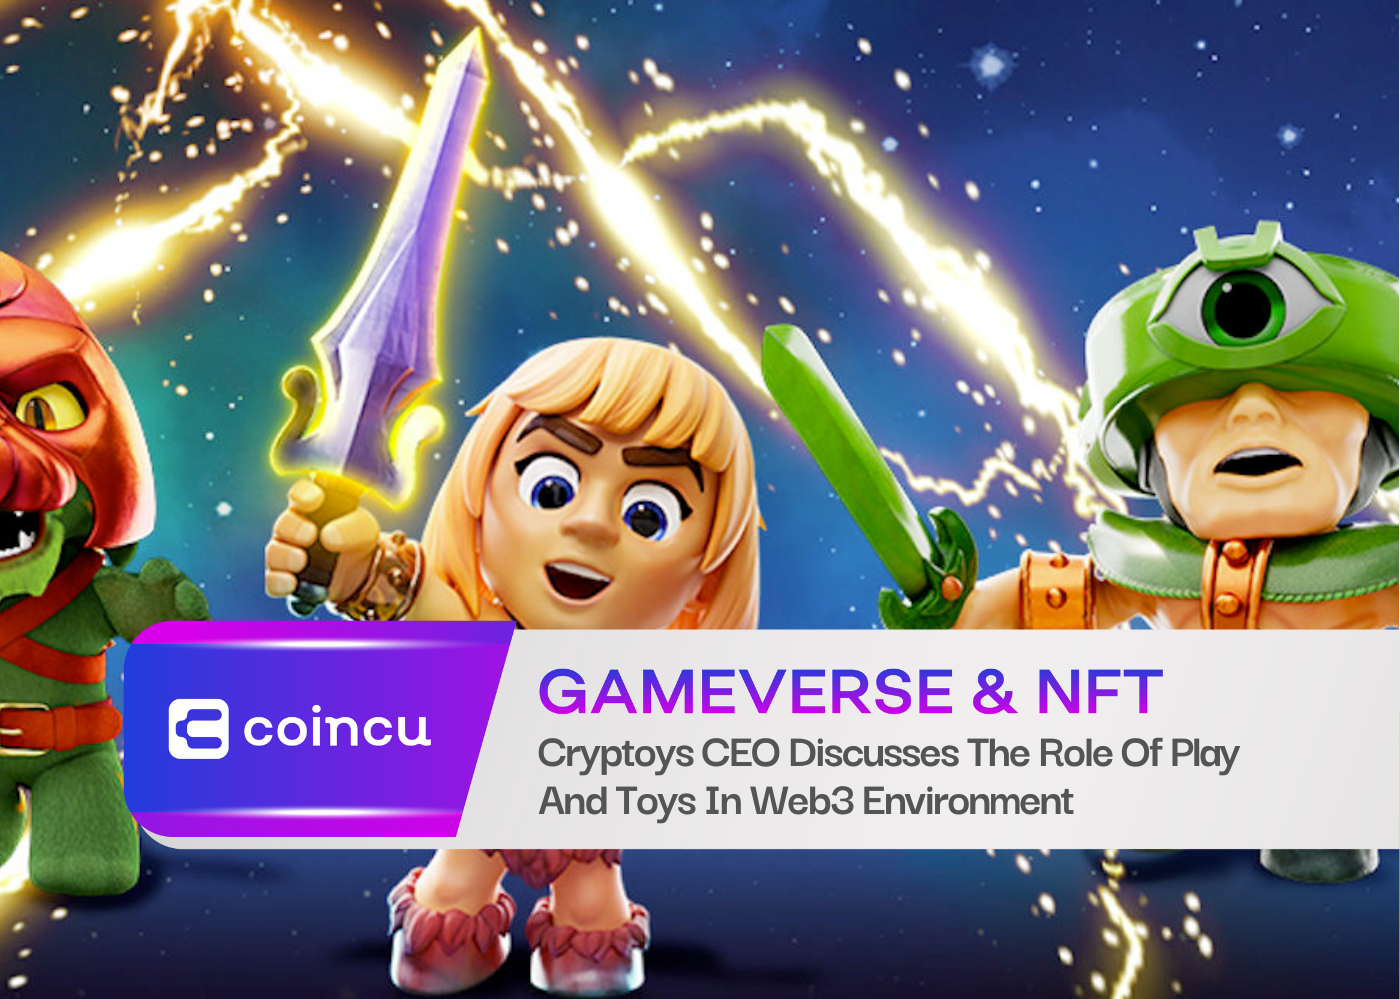 Cryptoys CEO Discusses The Role Of Play And Toys In Web3 Environment